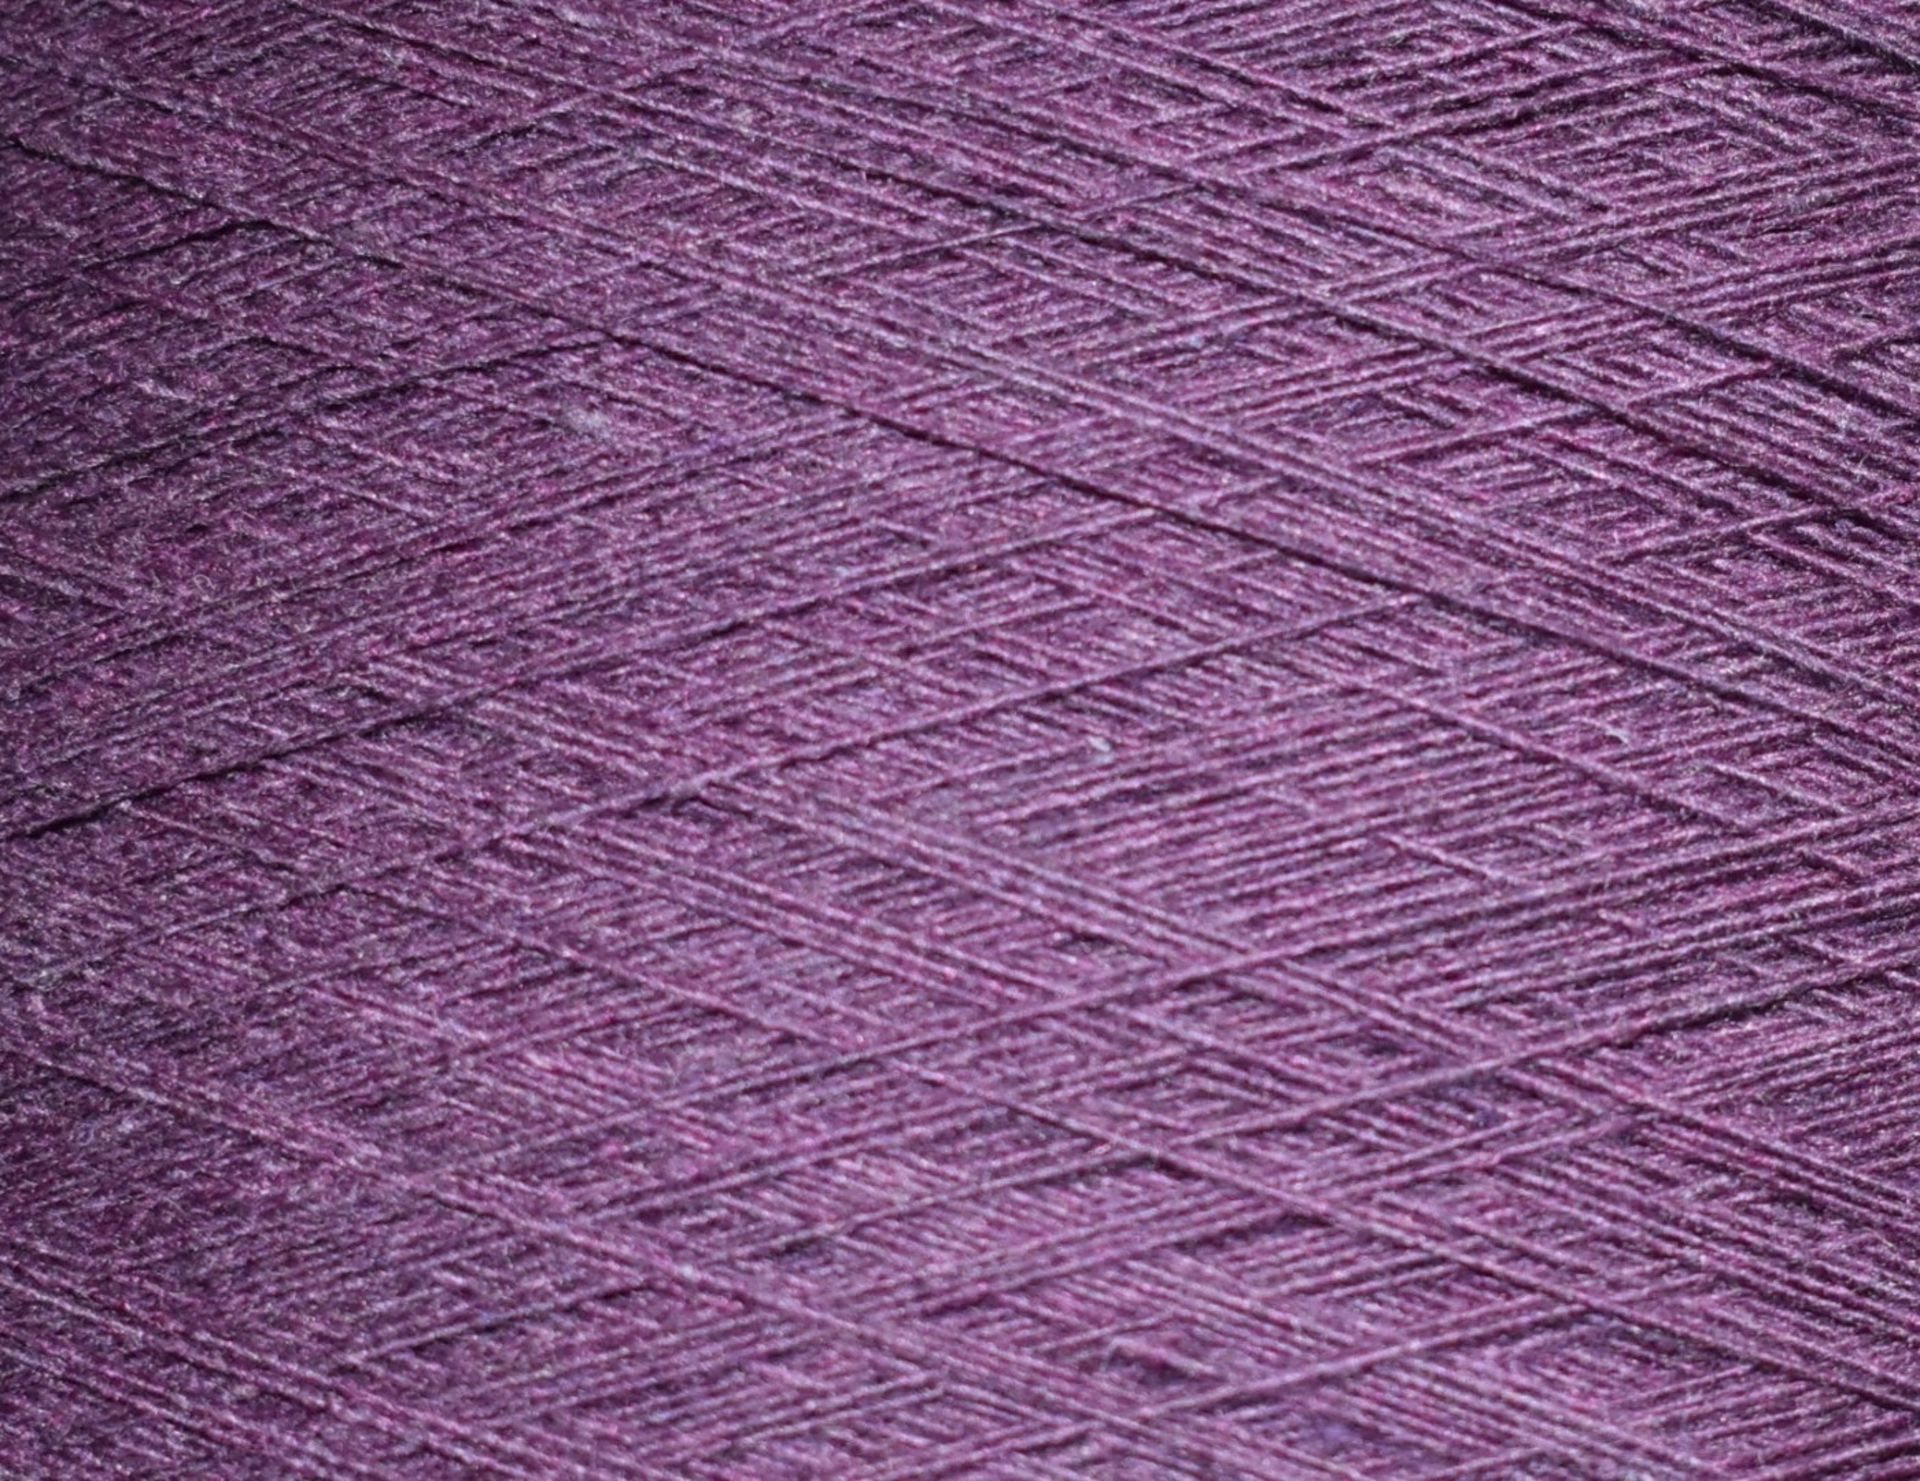 12 x Cones of 1/13 MicroCotton Knitting Yarn - Purple - Approx Weight: 2,300g - New Stock ABL Yarn - Image 6 of 9